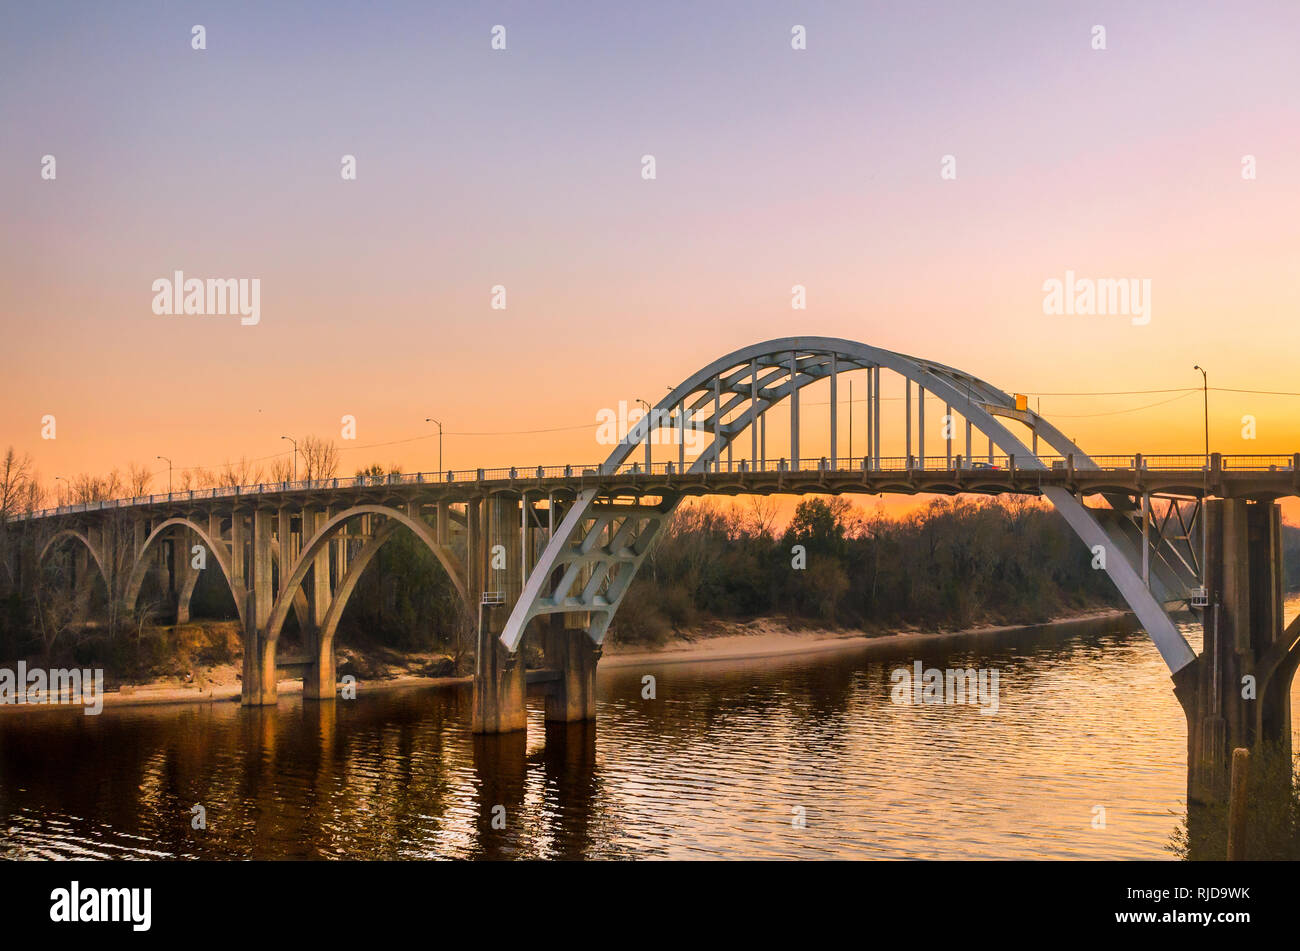 The sun sets behind the Edmund Pettus Bridge, Feb. 14, 2015, in Selma, Alabama. The bridge played an important role in the Civil Rights Movement. Stock Photo